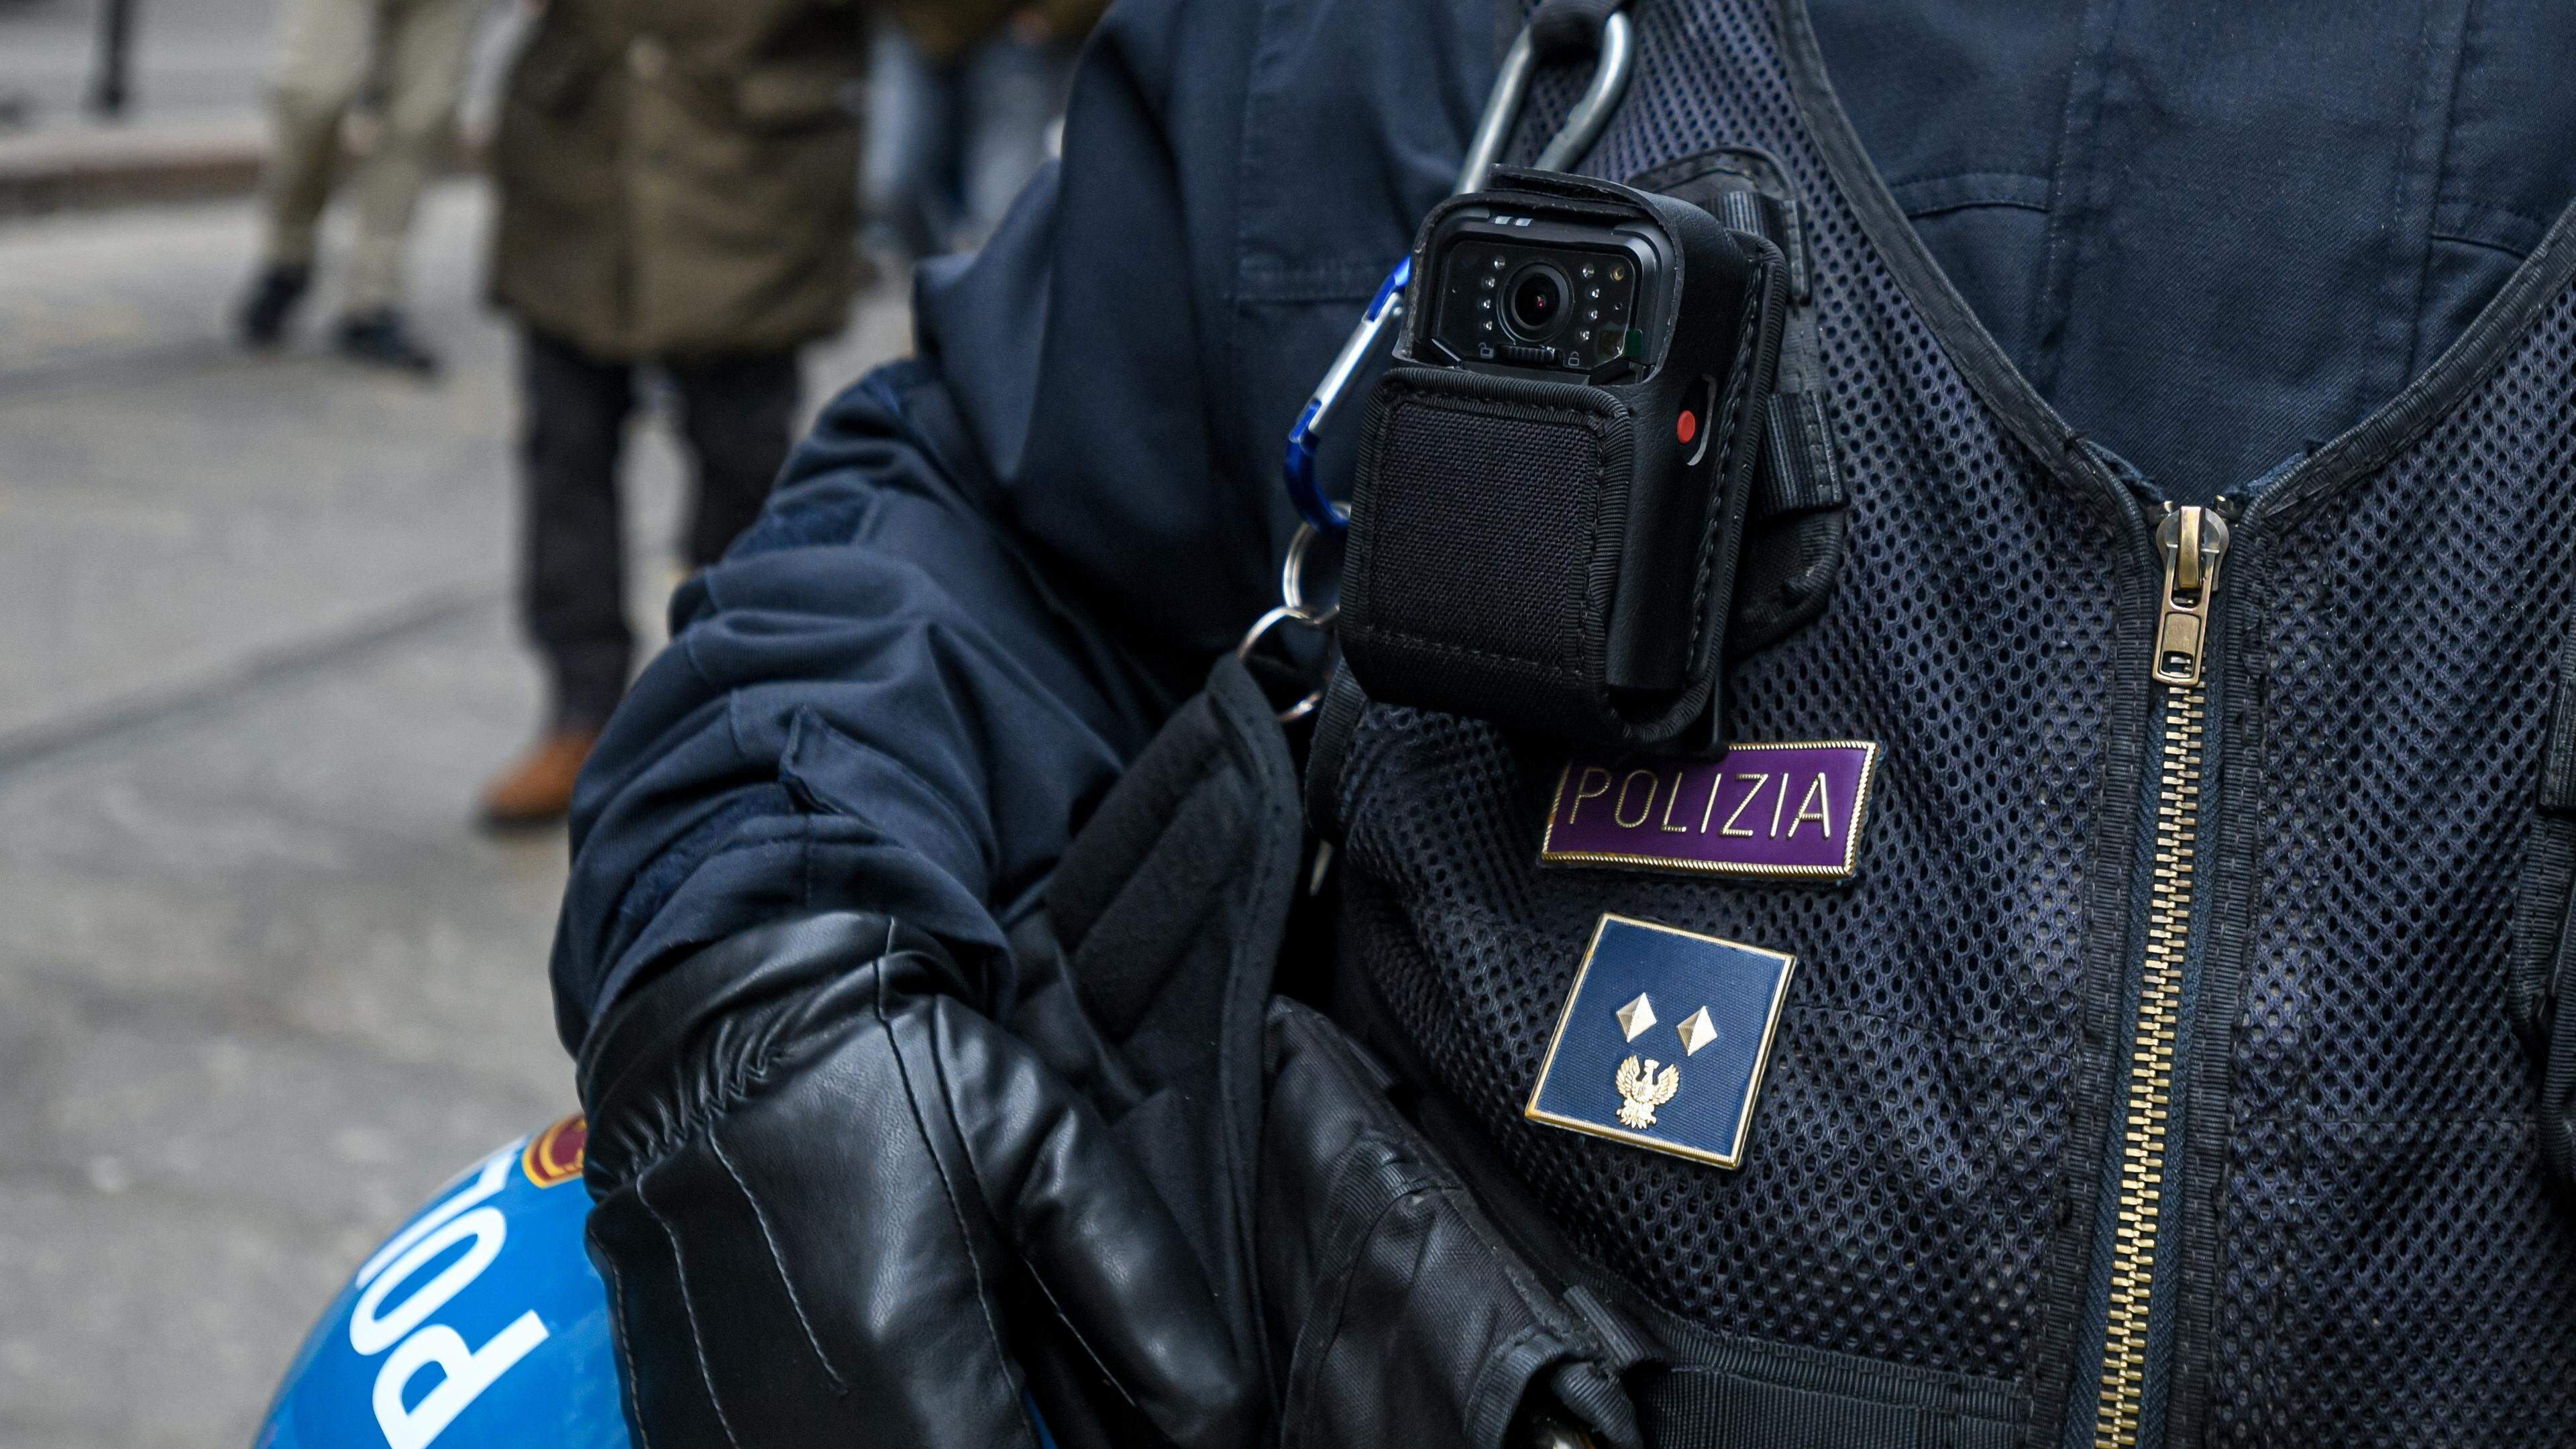 Police bodycams are already standard equipment in many countries. On the one hand, they serve to preserve evidence and, on the other, their very existence helps to de-escalate the situation.